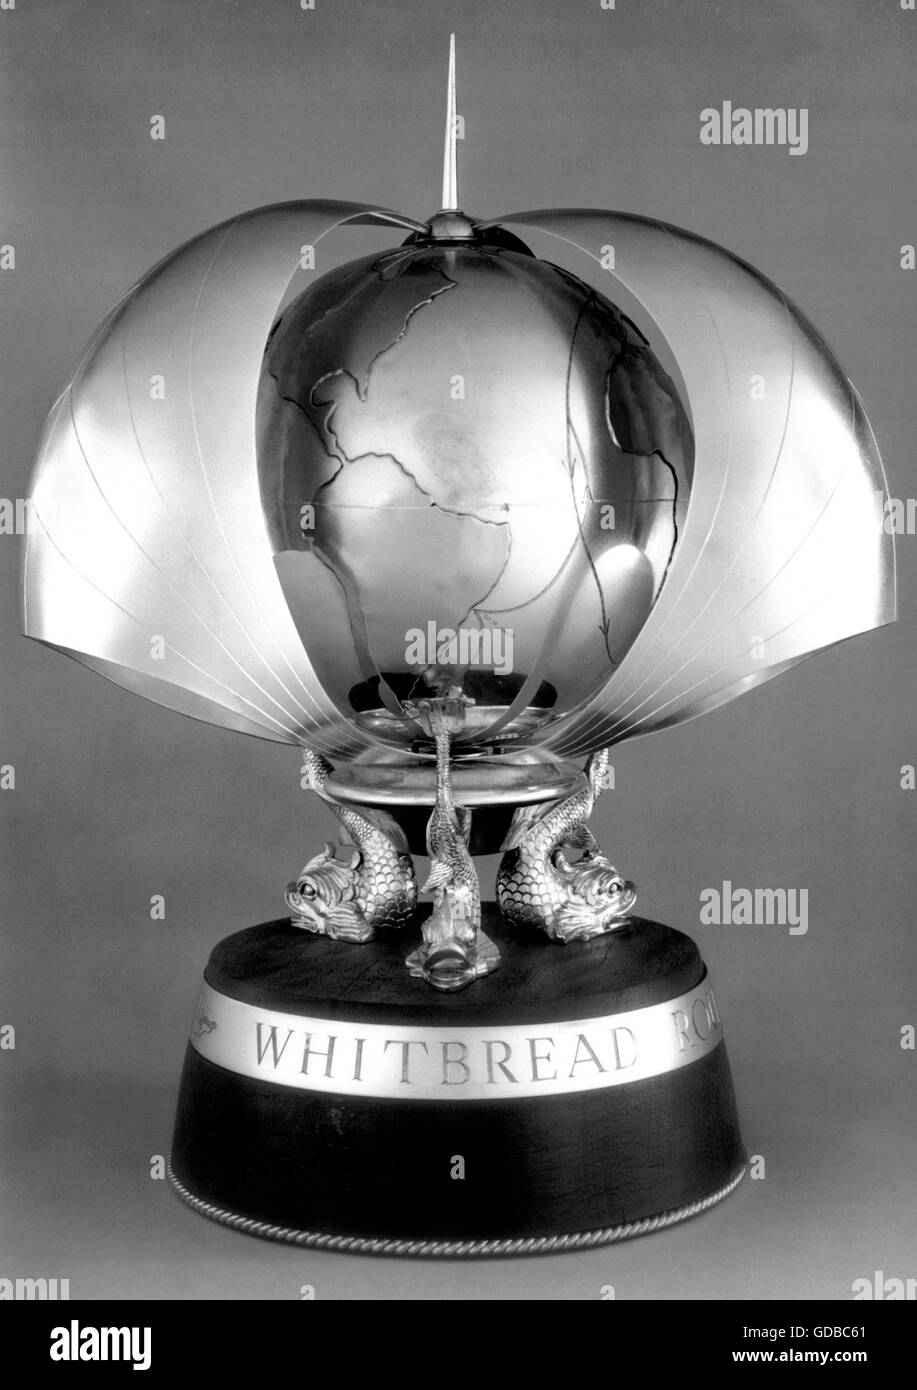 AJAX NEWS PHOTOS. 1977.PORTSMOUTH, ENGLAND. - WHITBREAD ROUND THE WORLD RACE TROPHY 1977-78. PHOTO:AJAX NEWS & FEATURE SERVICE  REF:TRO_WHITBREAD_77_2 Stock Photo